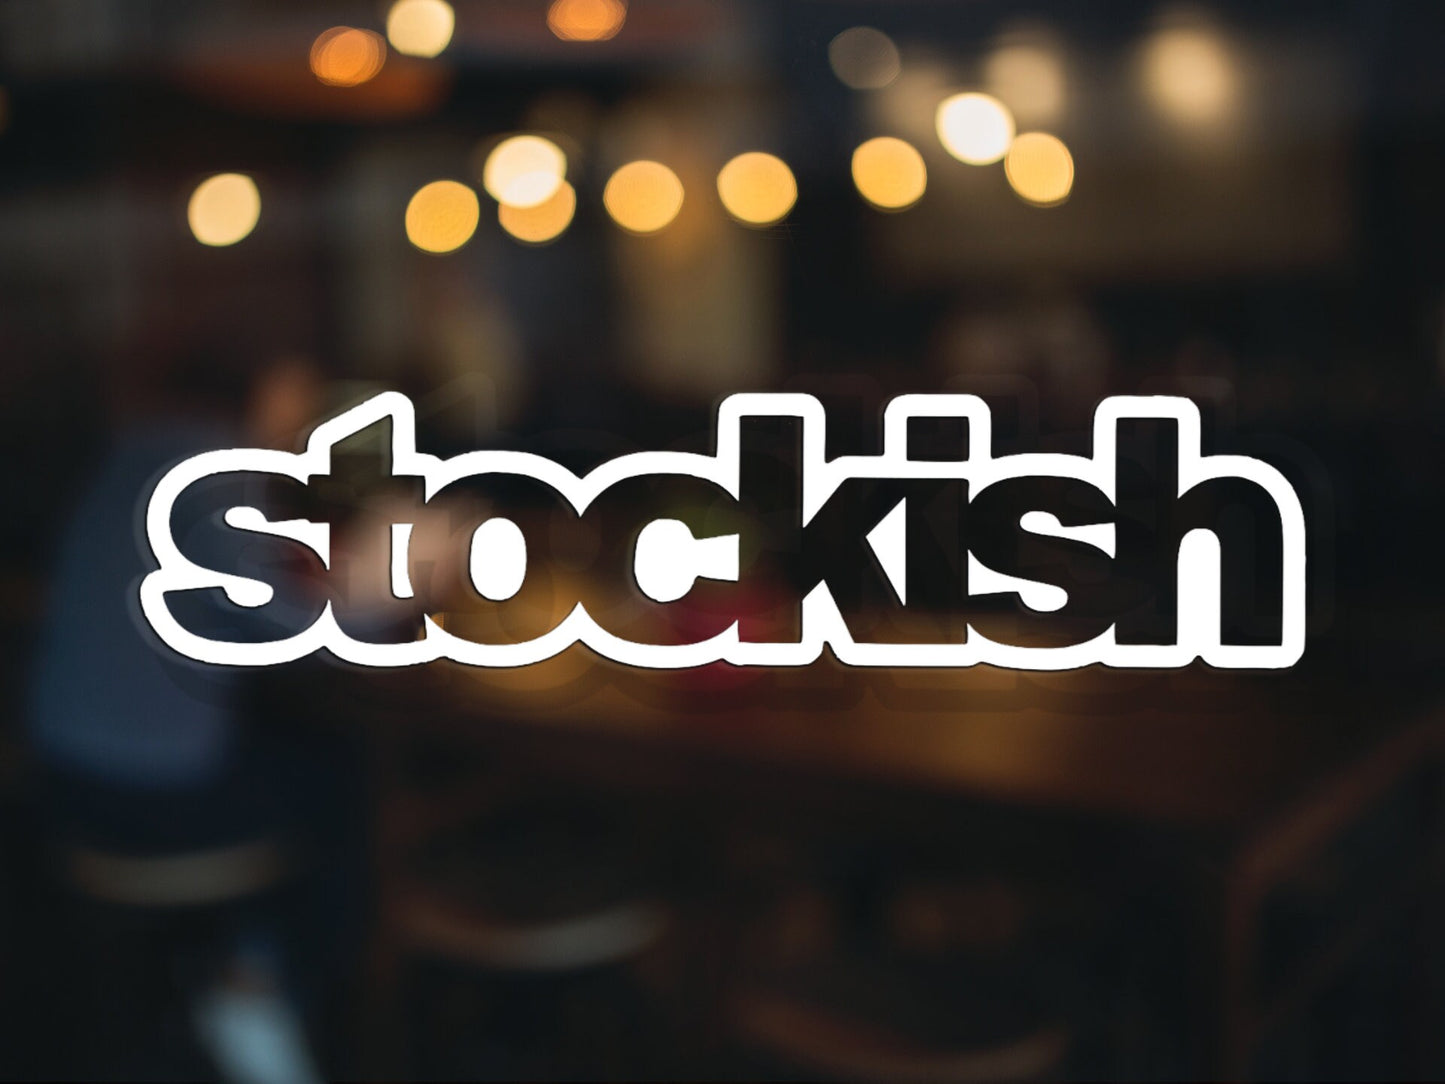 Stockish Decal - Many Colors & Sizes